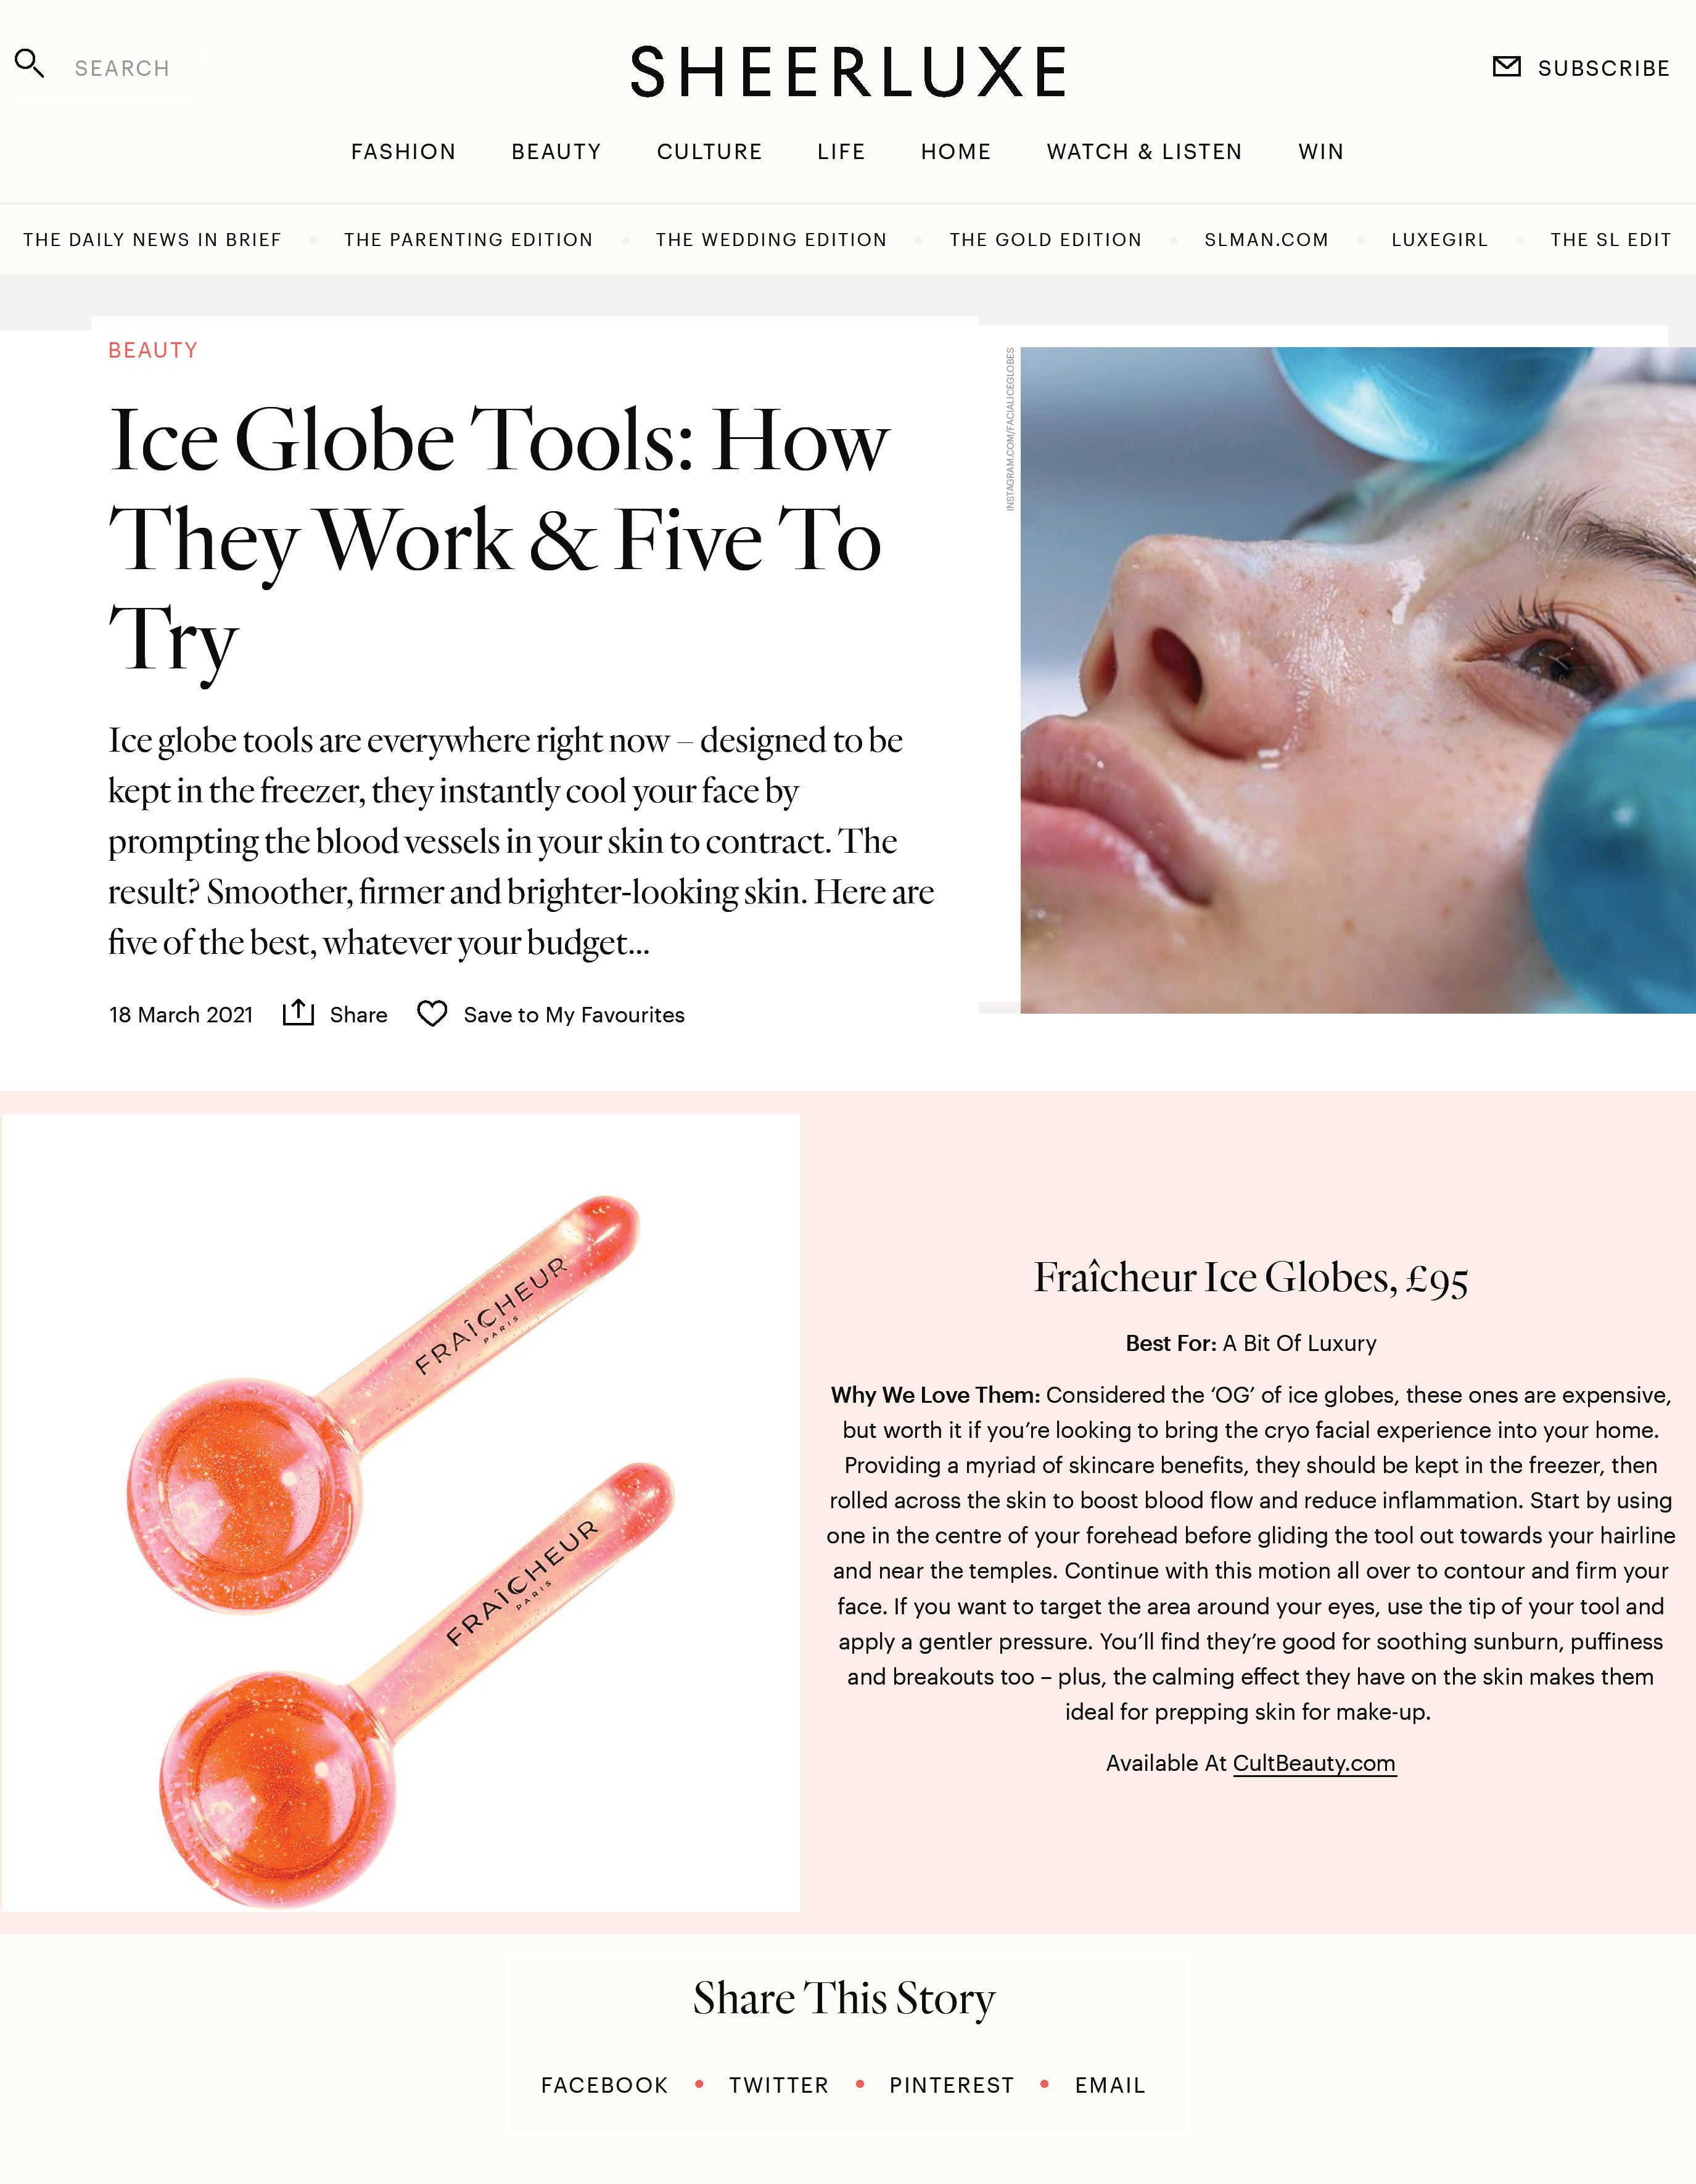 “Considered the ‘OG’ of ice globes. Providing a myriad of skincare benefits, they should be kept in the freezer, then rolled across the skin to boost blood flow and reduce inflammation.